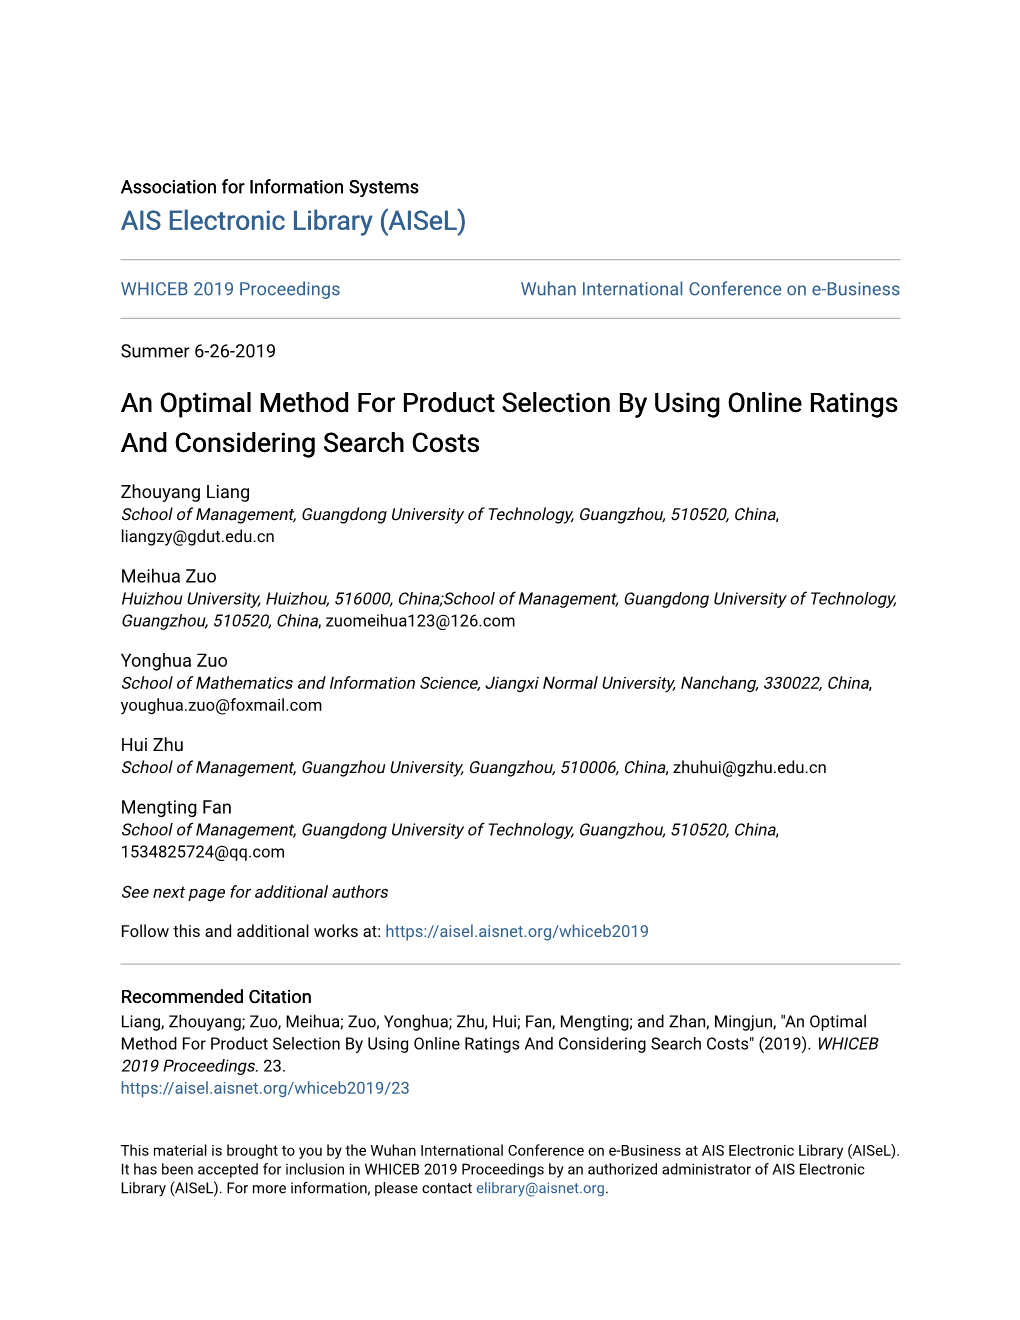 An Optimal Method for Product Selection by Using Online Ratings and Considering Search Costs